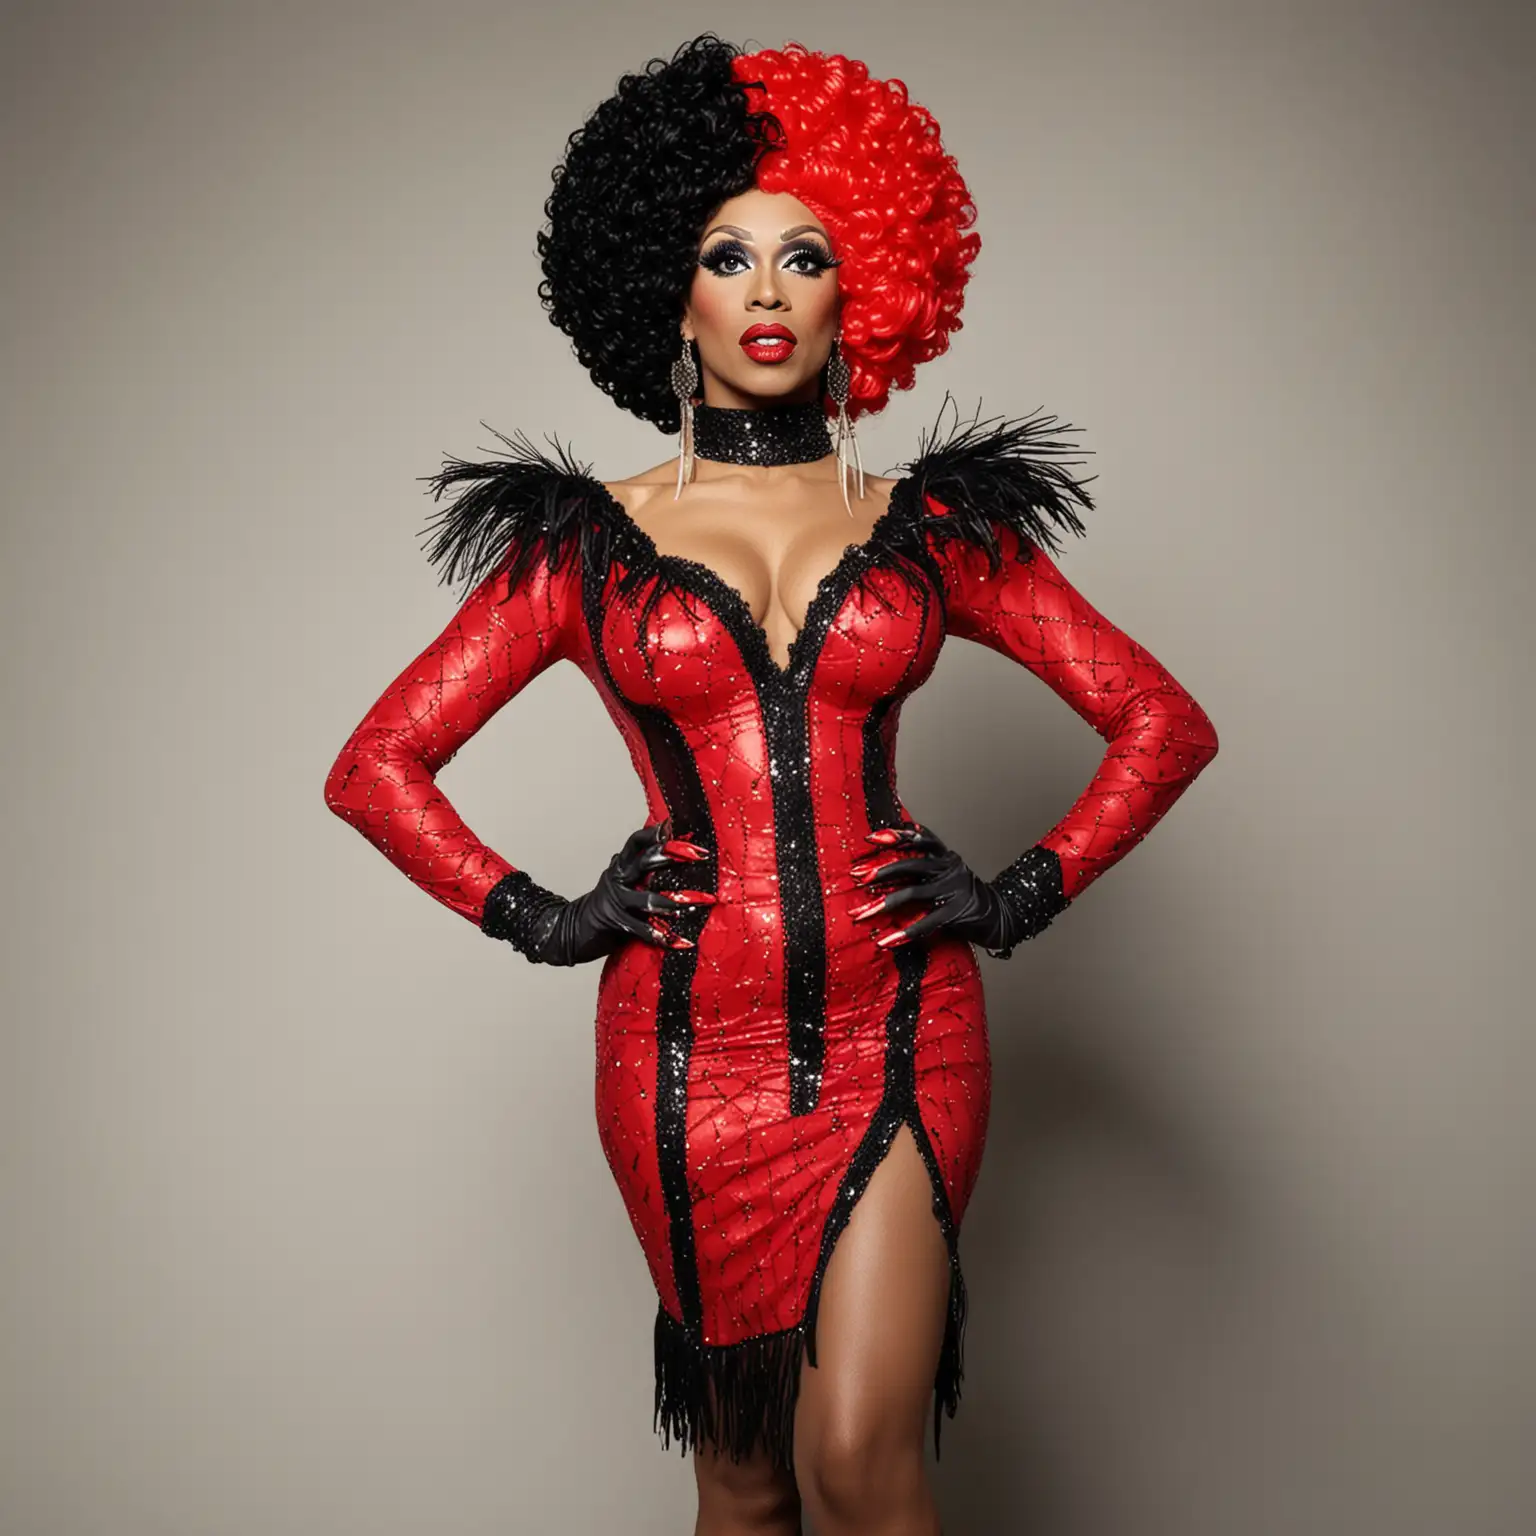 Colorful Black Drag Queen in Red and Black Costume with Blonde Wig